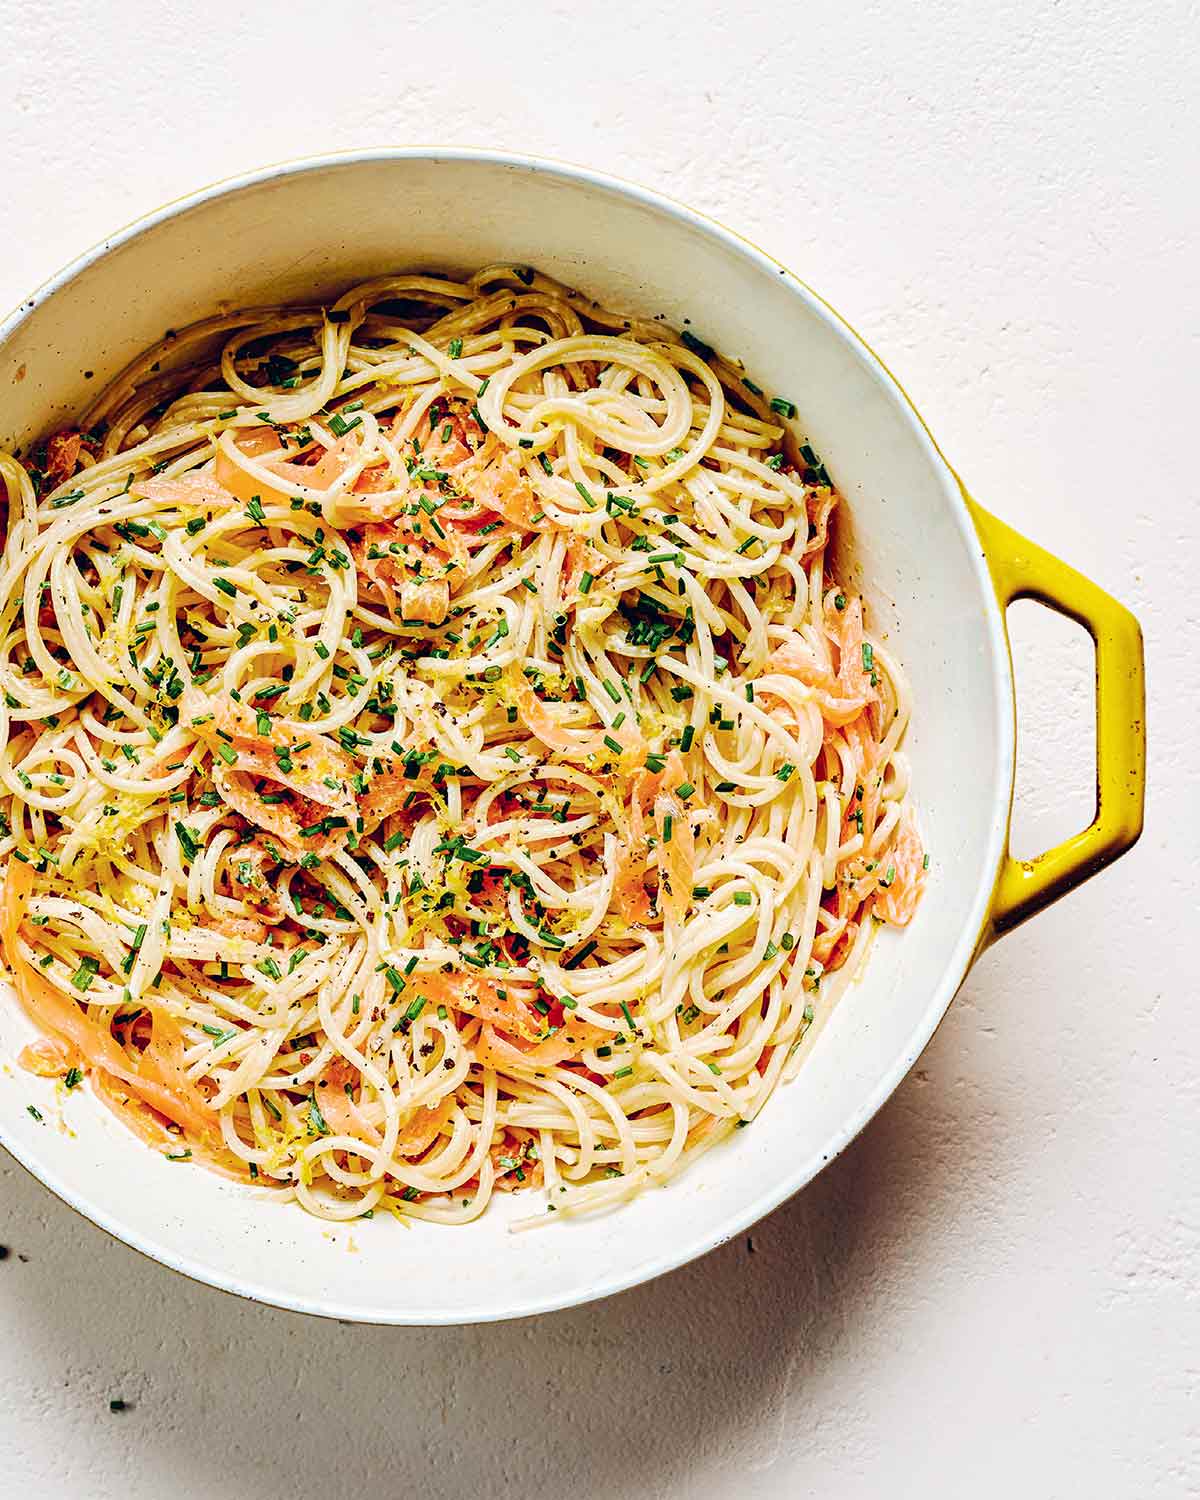 A yellow and white pot filled with smoked salmon pasta and garnished with fresh chives.